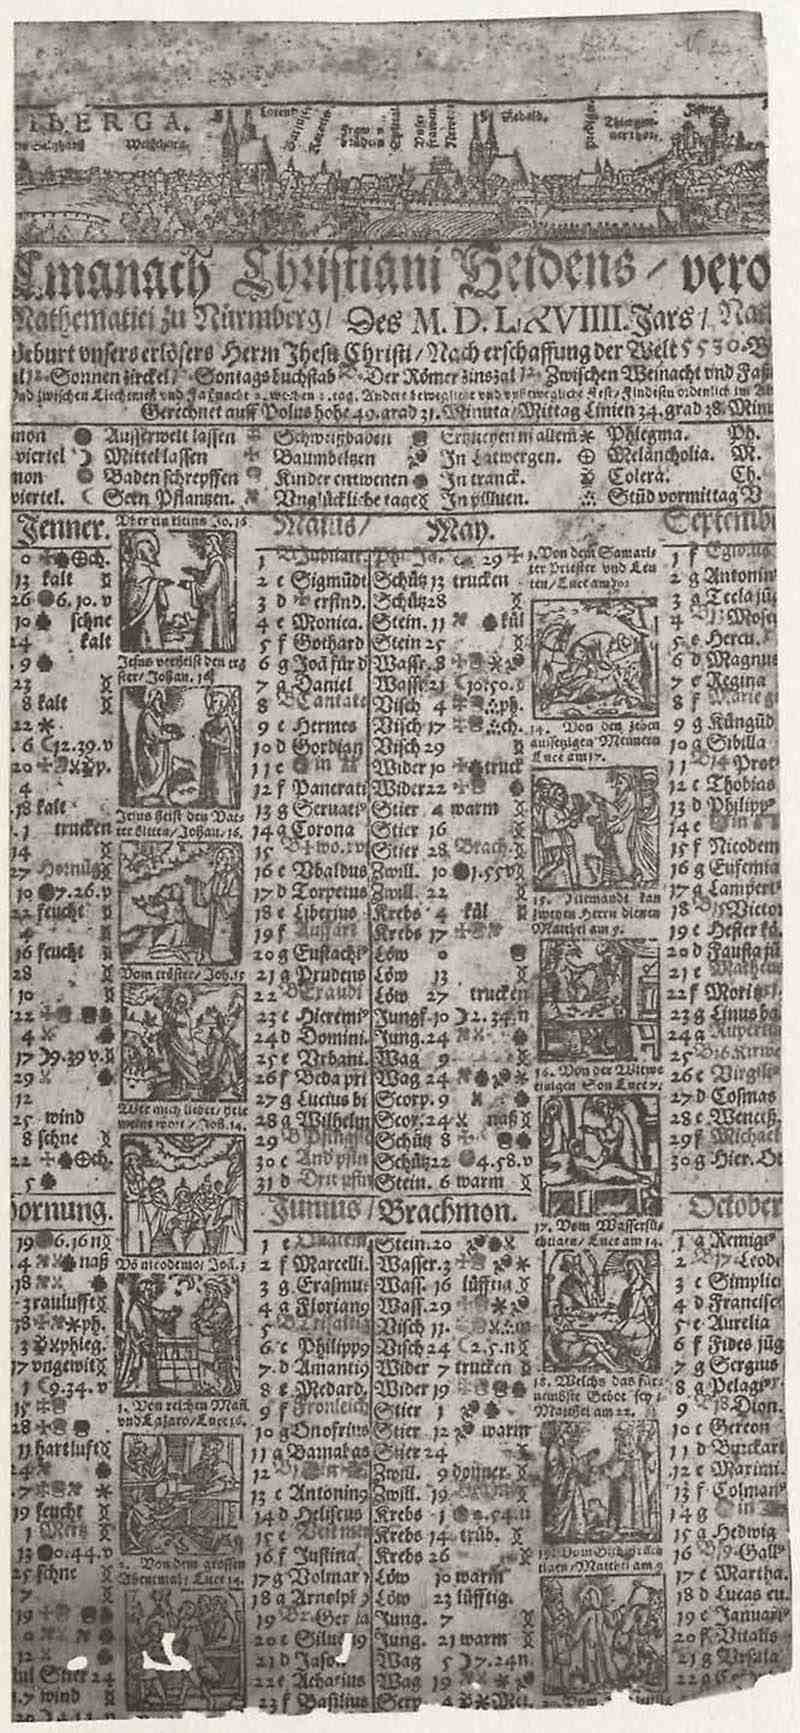 Calendar of year 1569, part A. Nicolaus Knorr